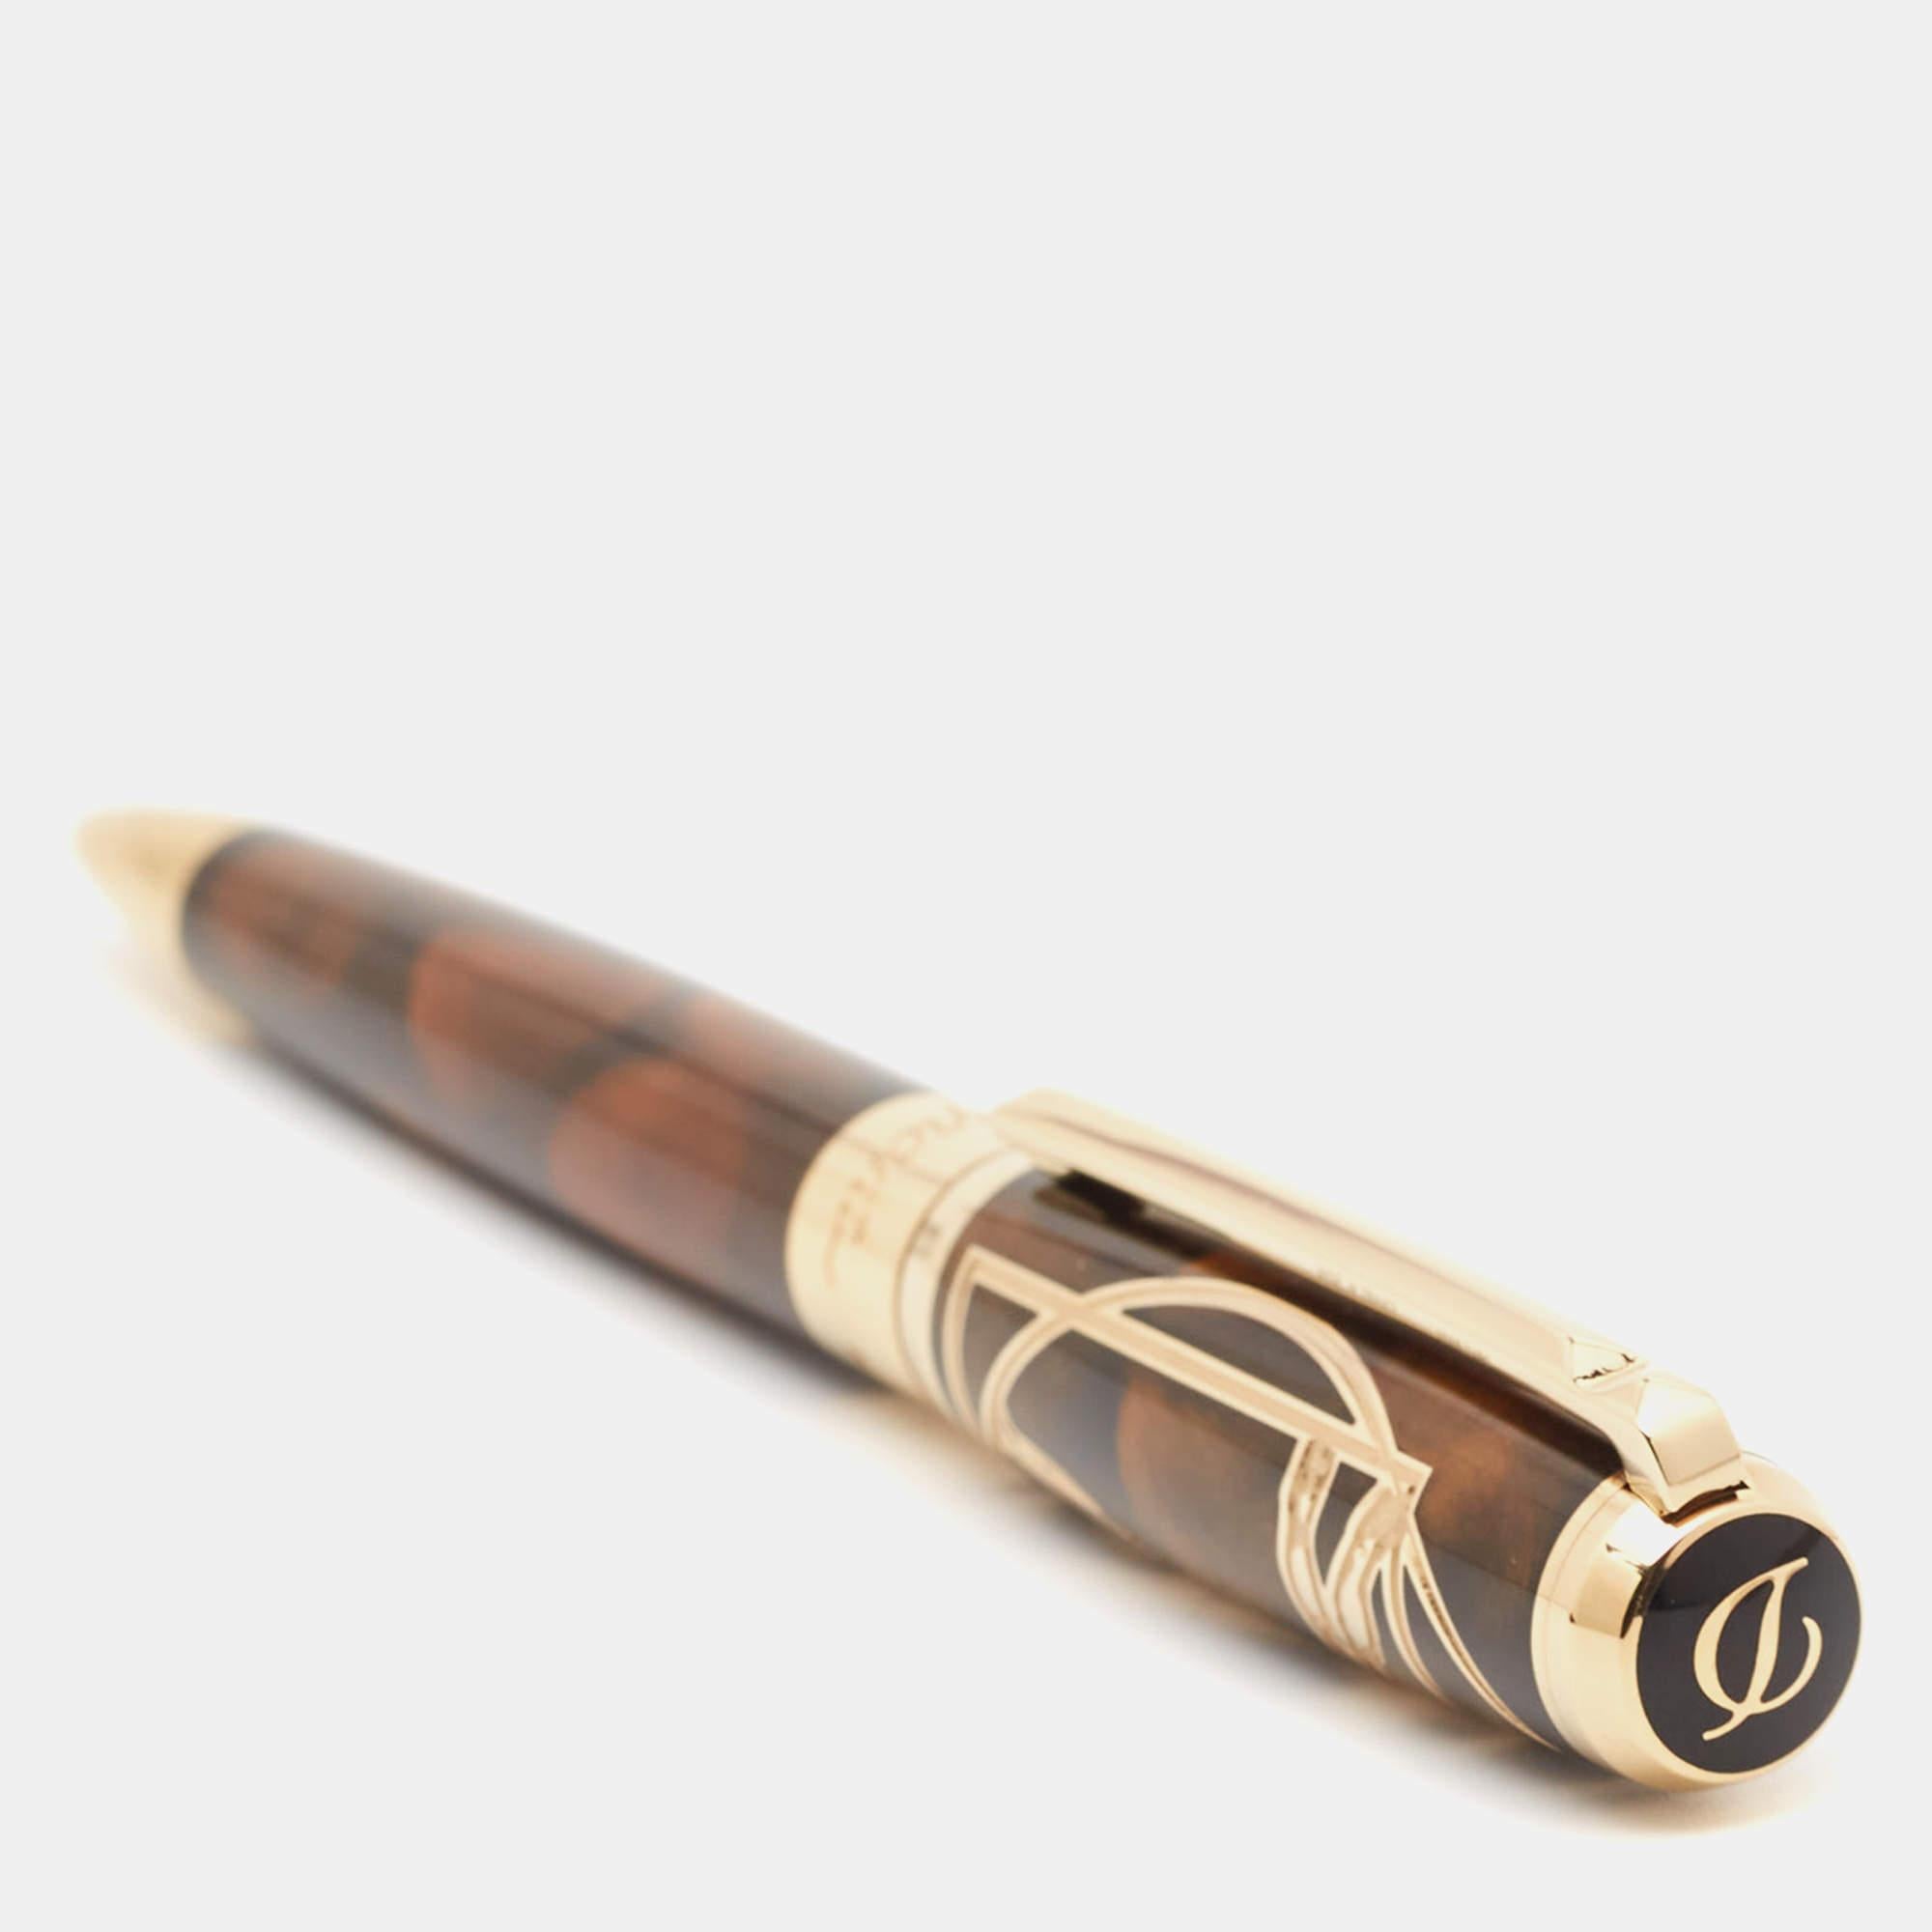 S.T. Dupont's ballpoint pen in lacquer and gold-tone metal is defined by quality craftsmanship. It has a sleek shape and just the right details to achieve a luxurious finish.

Includes: Original Box, Authenticity Card, Info Booklet, 2 Extra Refills

